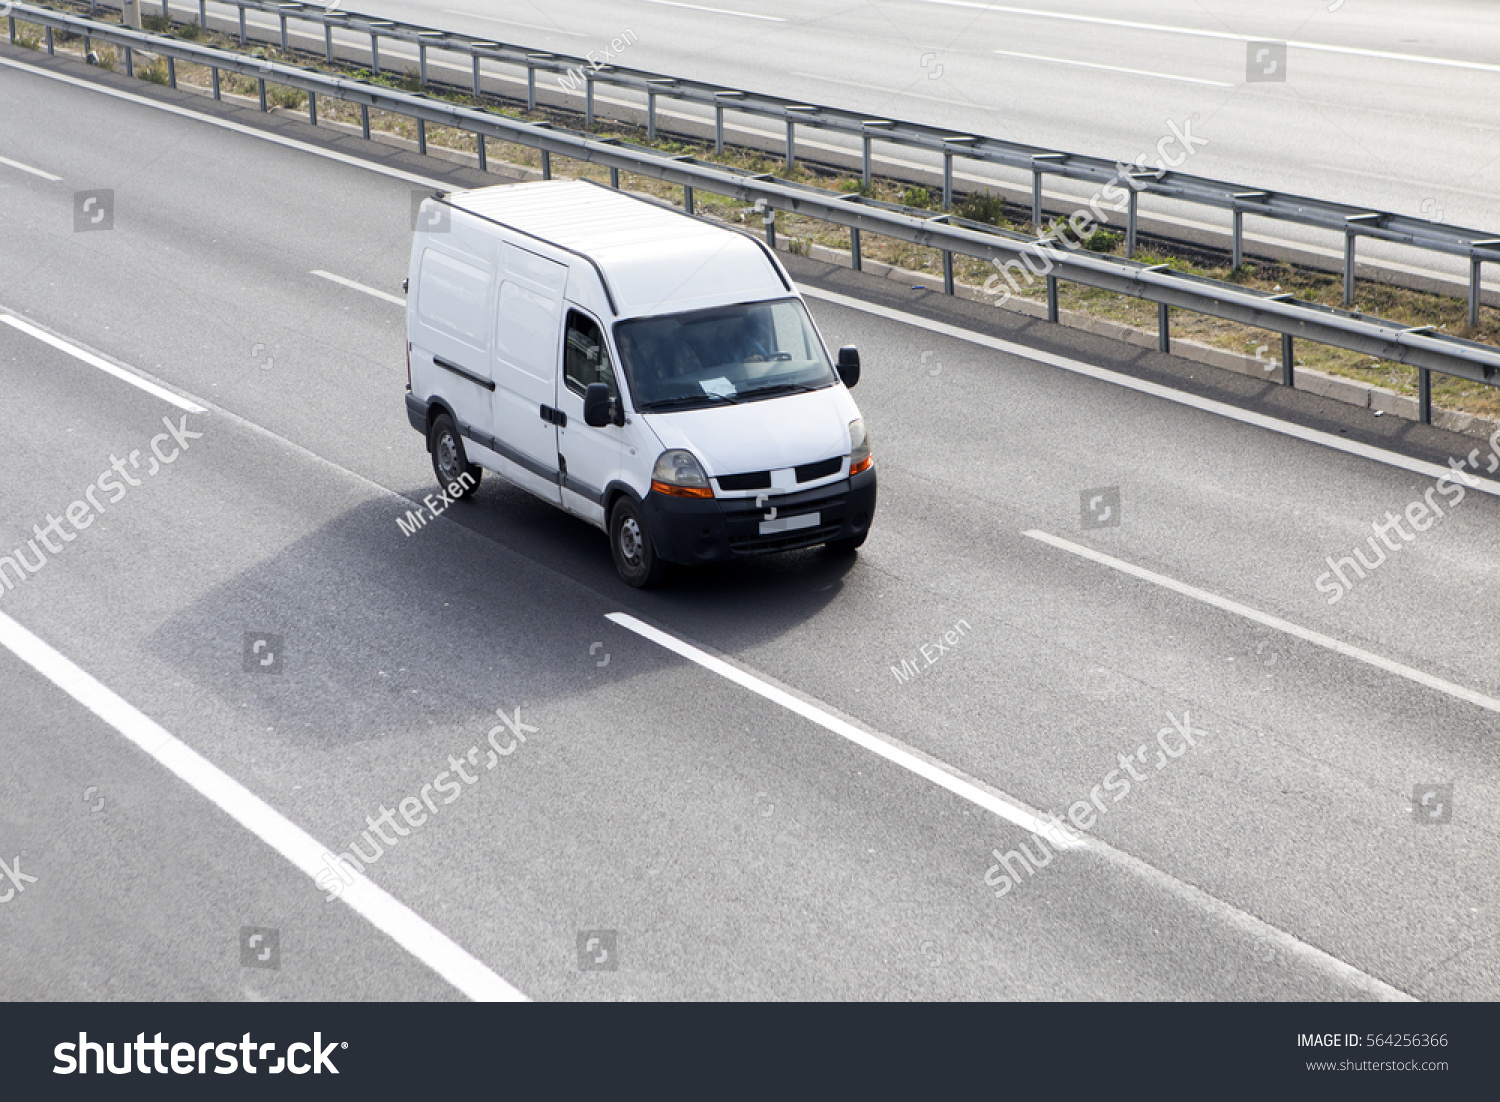 White Delivery Van On Highway #564256366